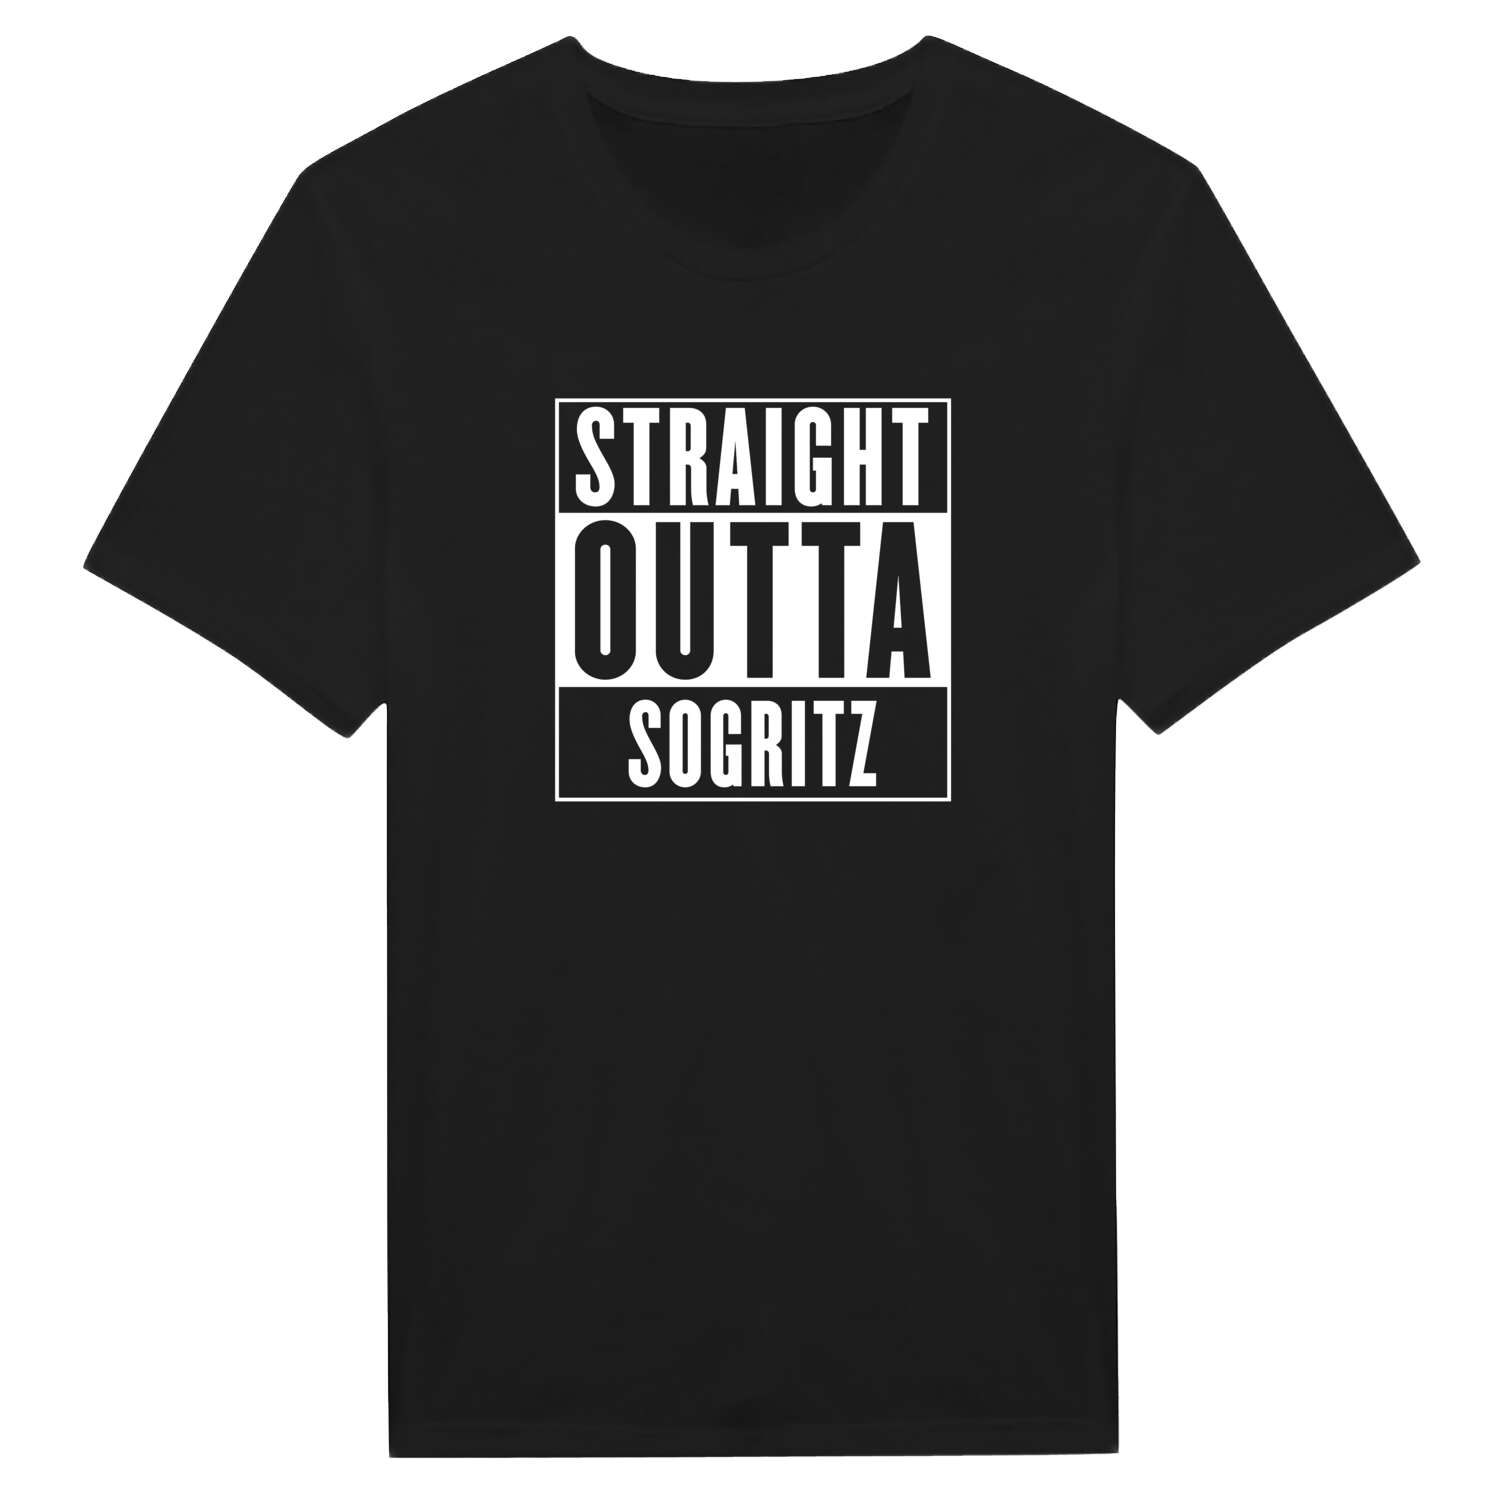 Sogritz T-Shirt »Straight Outta«